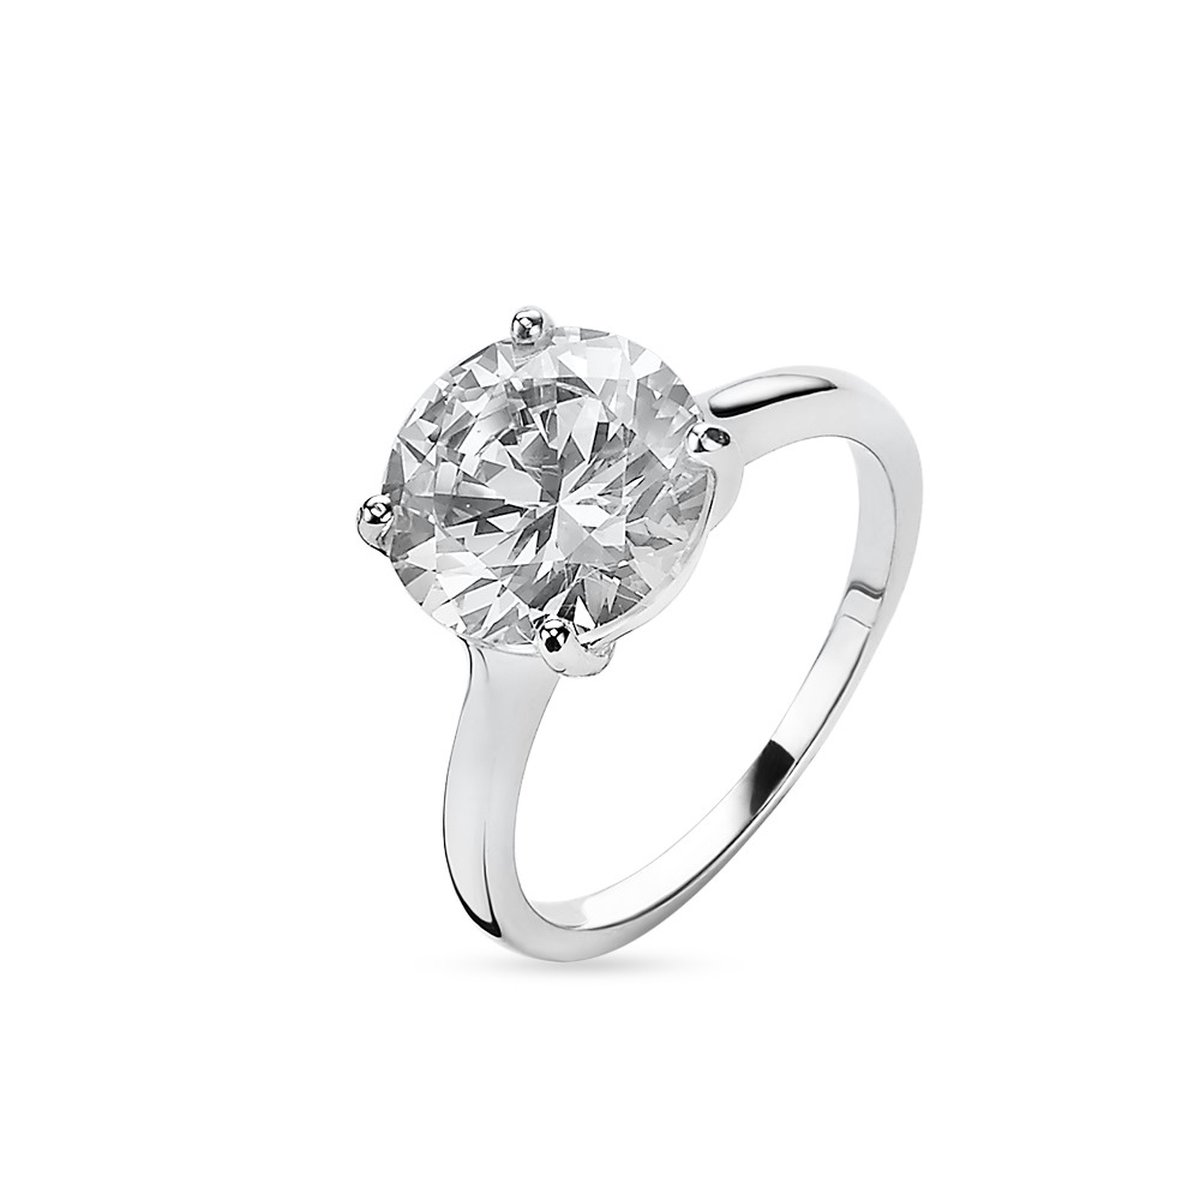 Twice As Nice Ring in zilver, solitaire 58